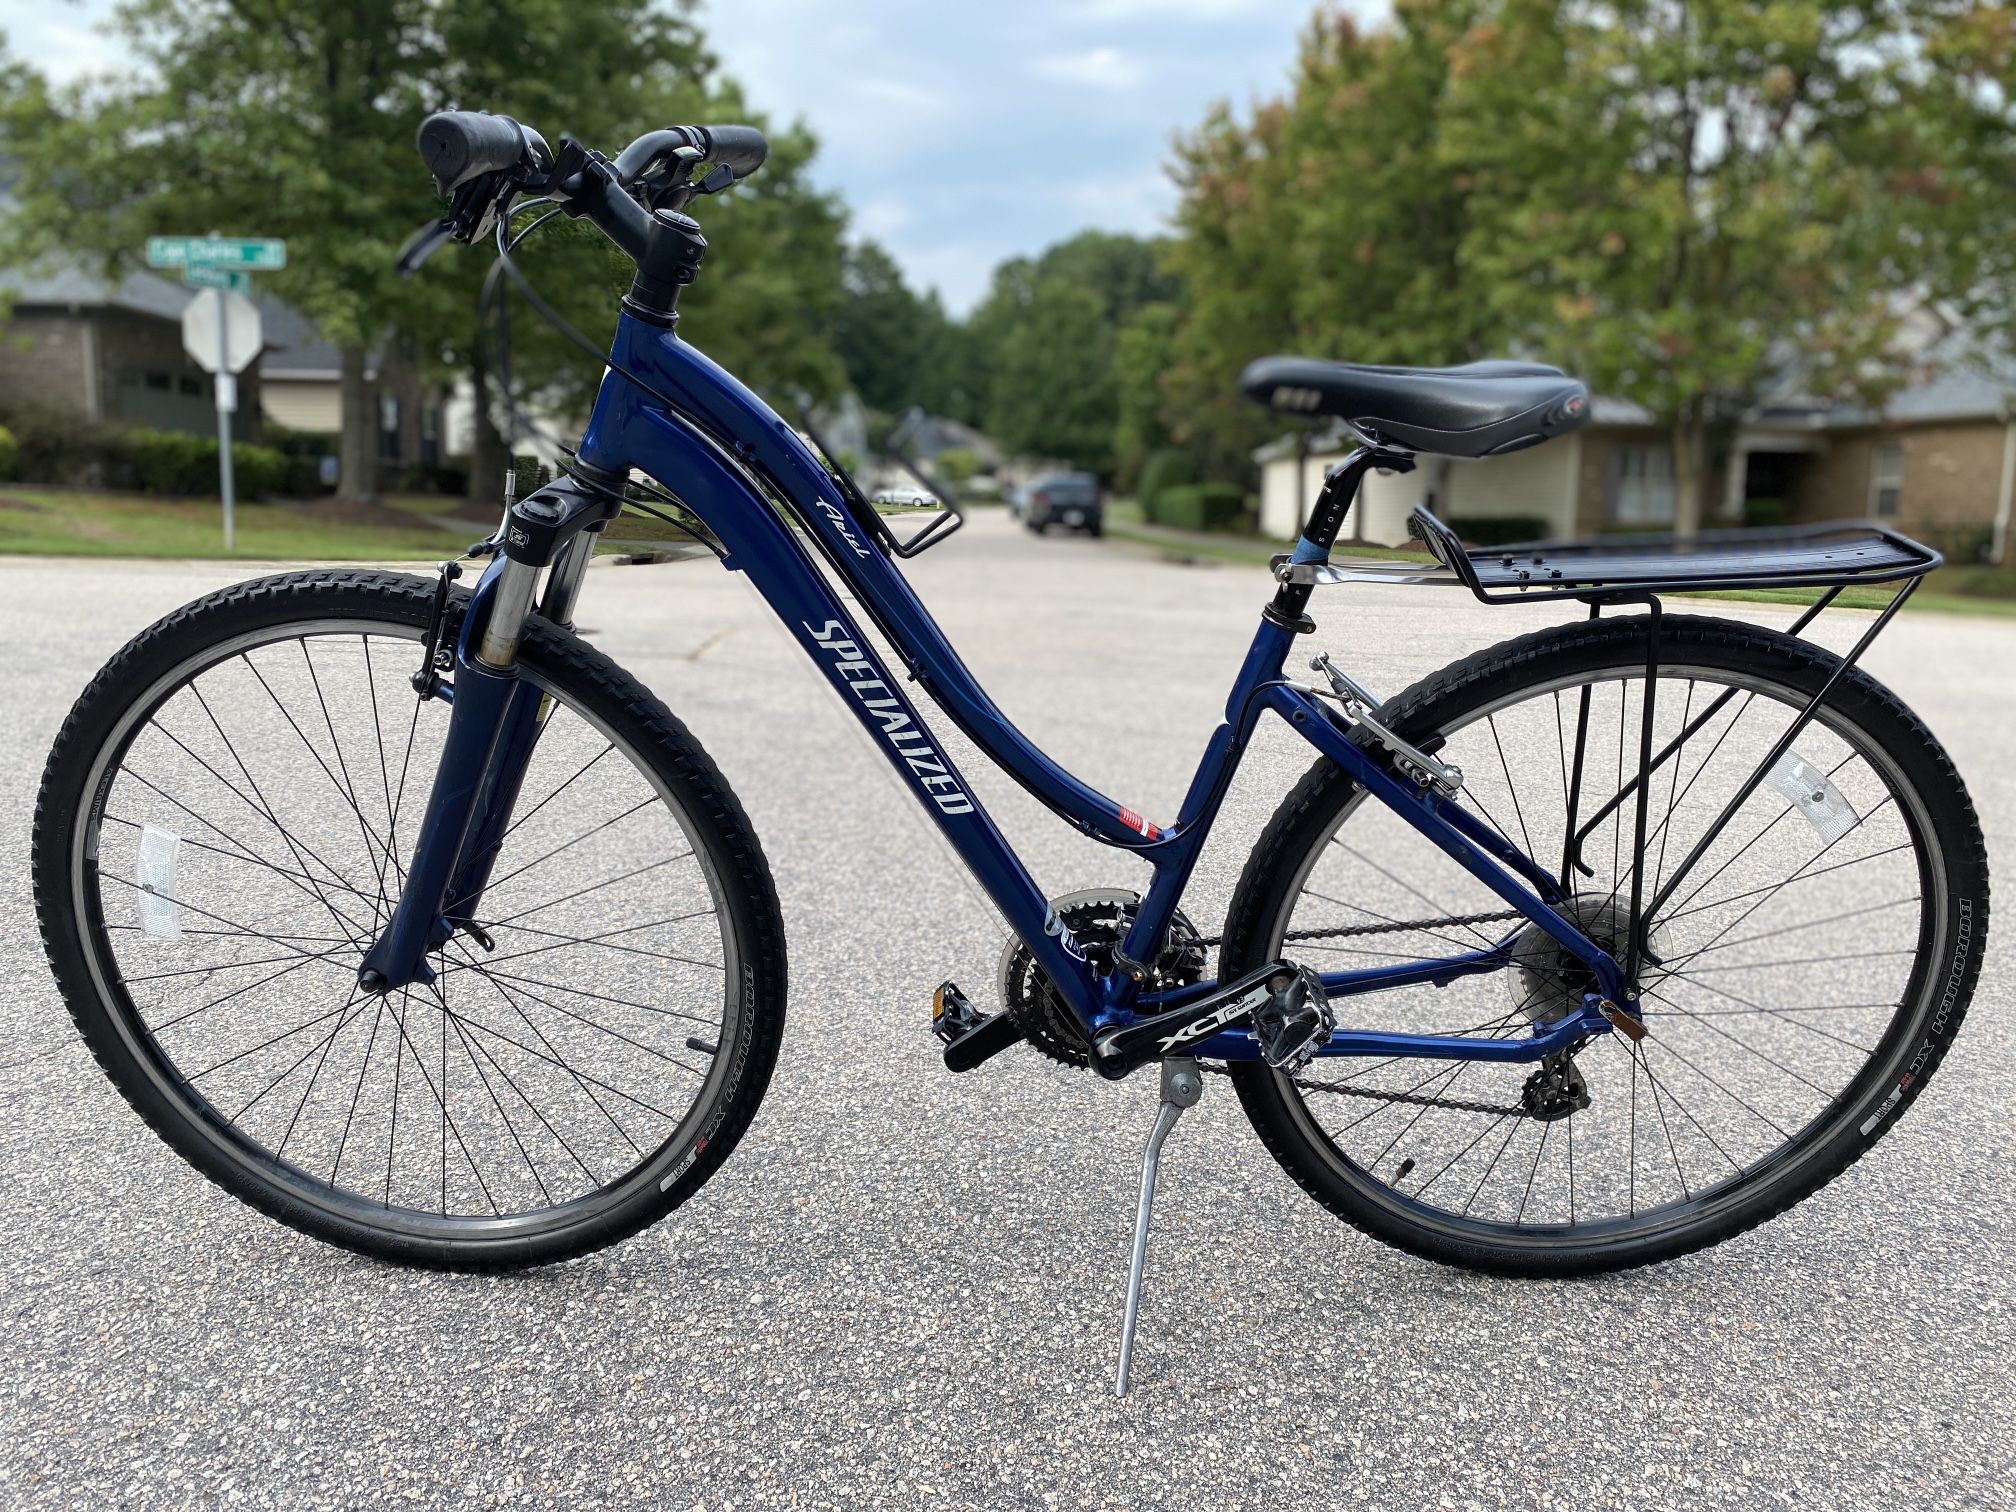 Aluminum Specialized Hardtail Road Bike, 29” Wheels, 18” Frame, 21 Speed, Blue, Front Suspension